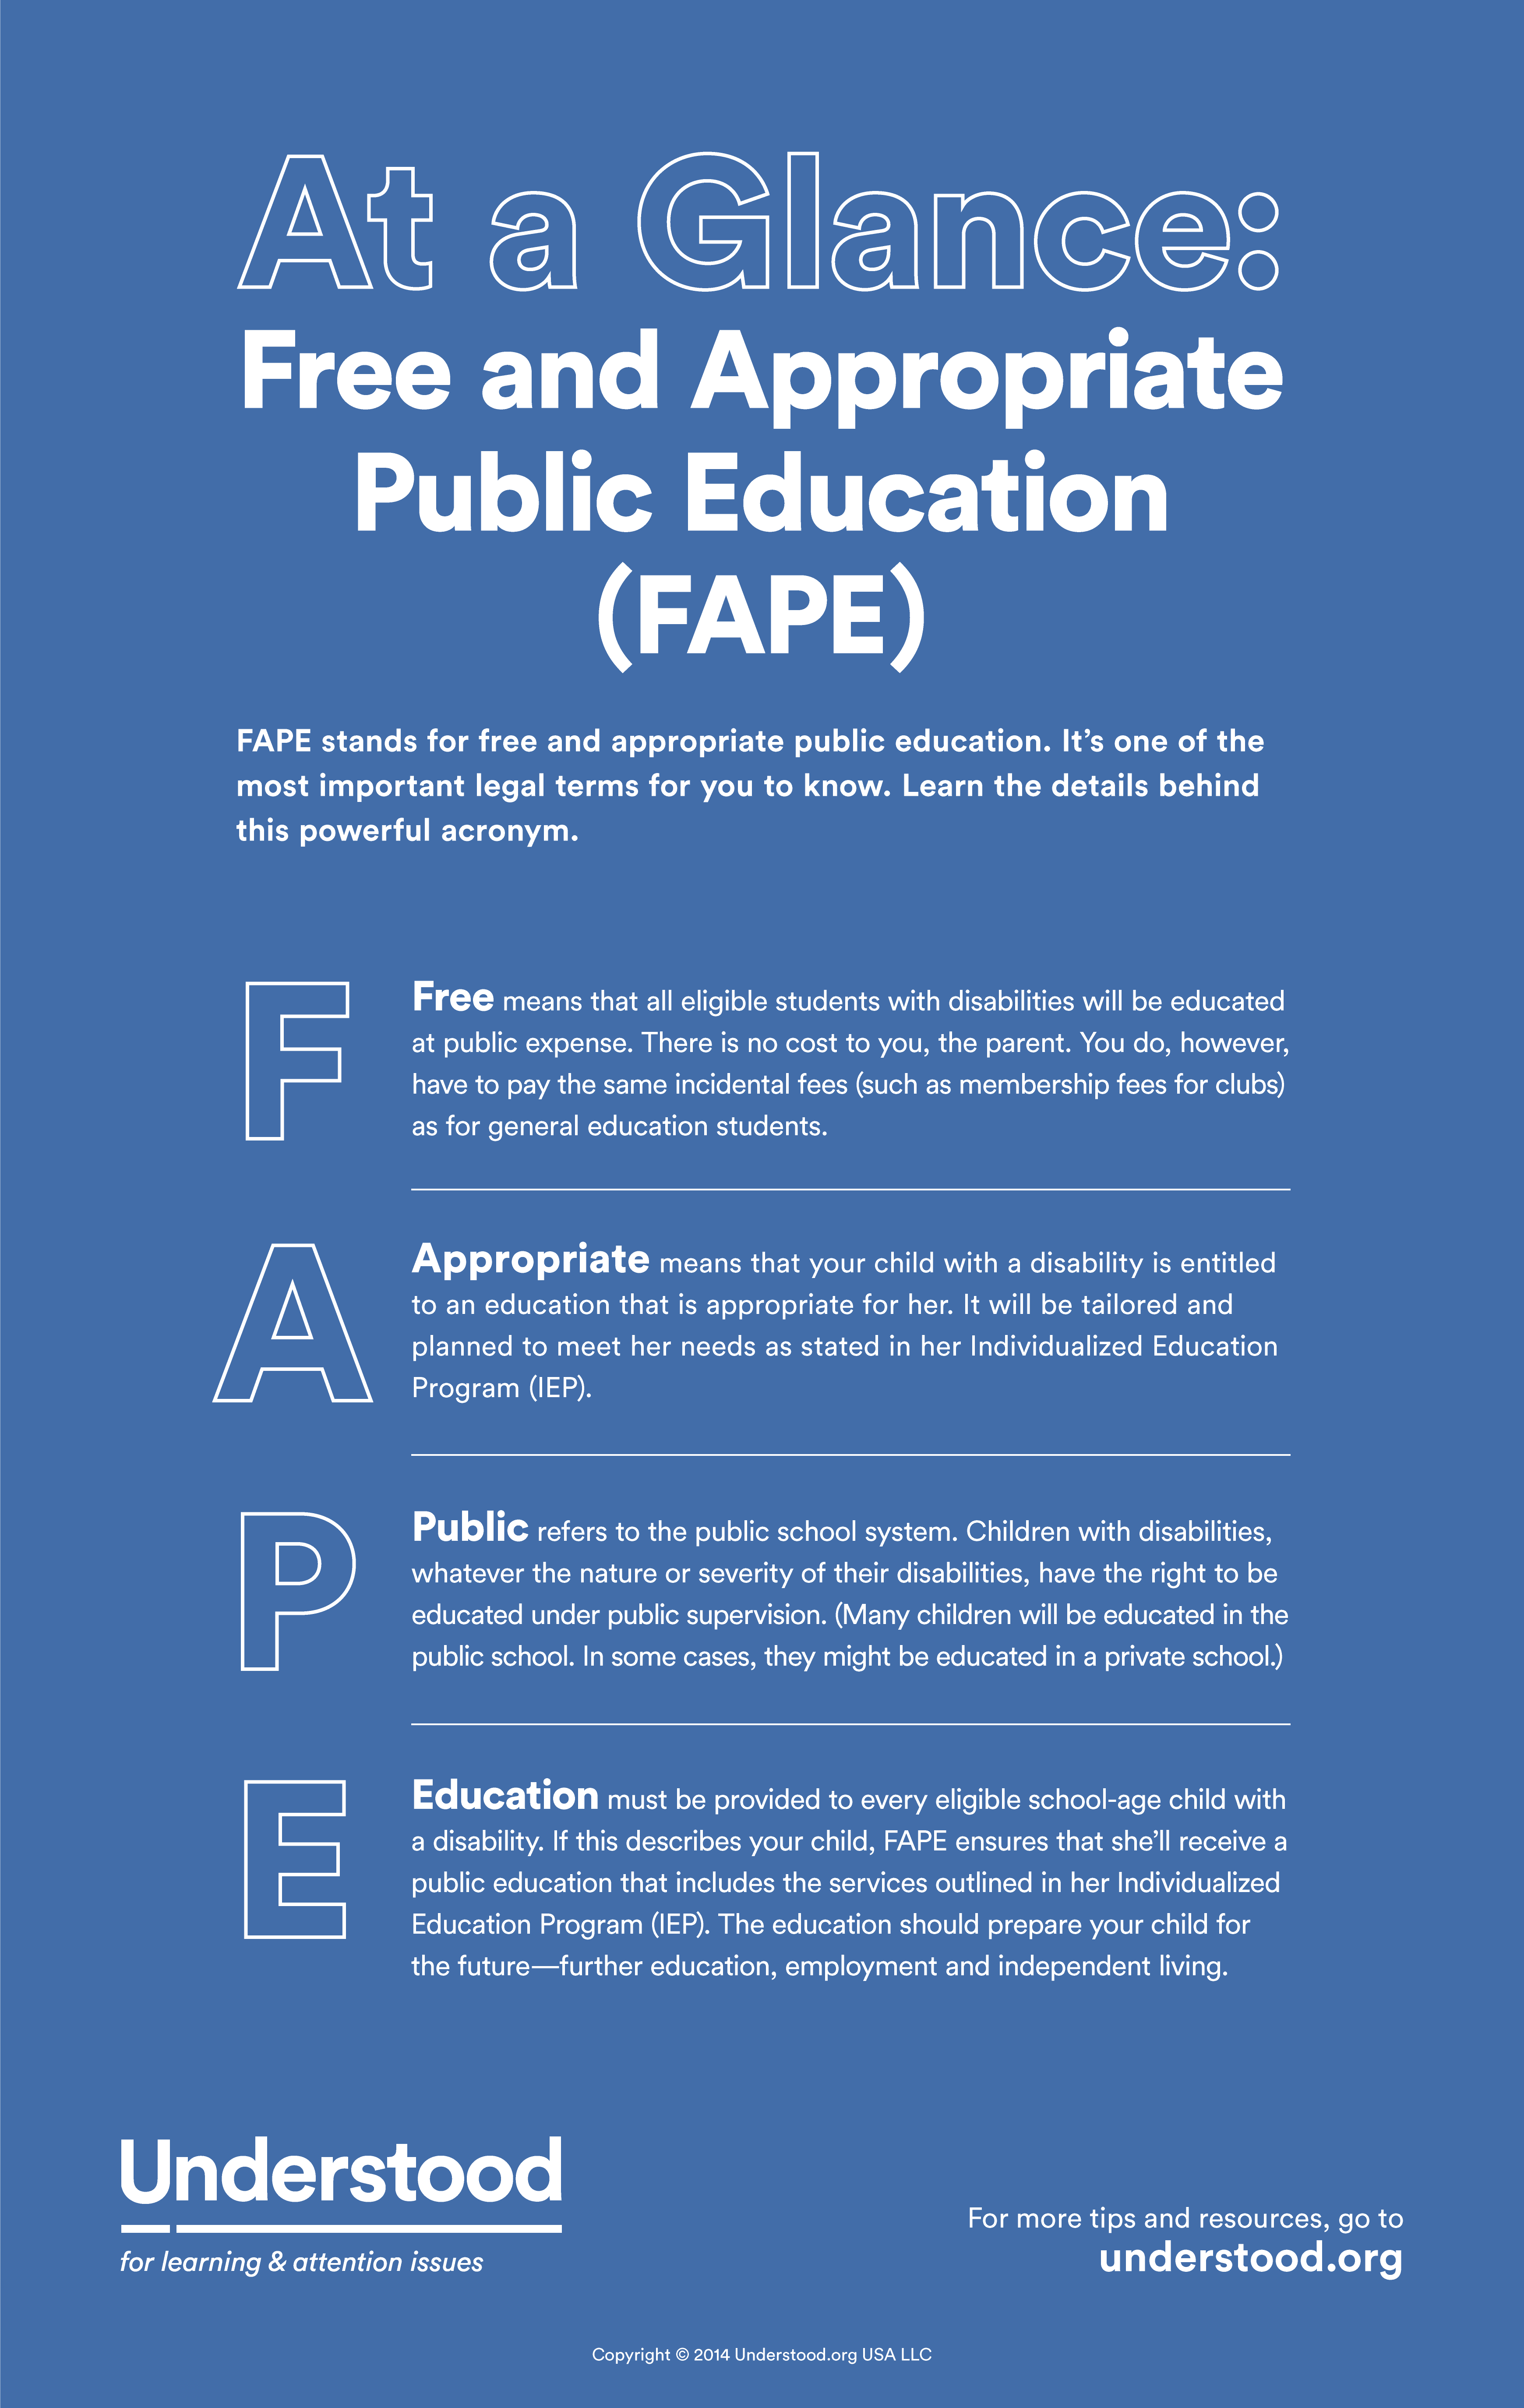 What Is Free and Appropriate Public Education? | Definition of FAPE